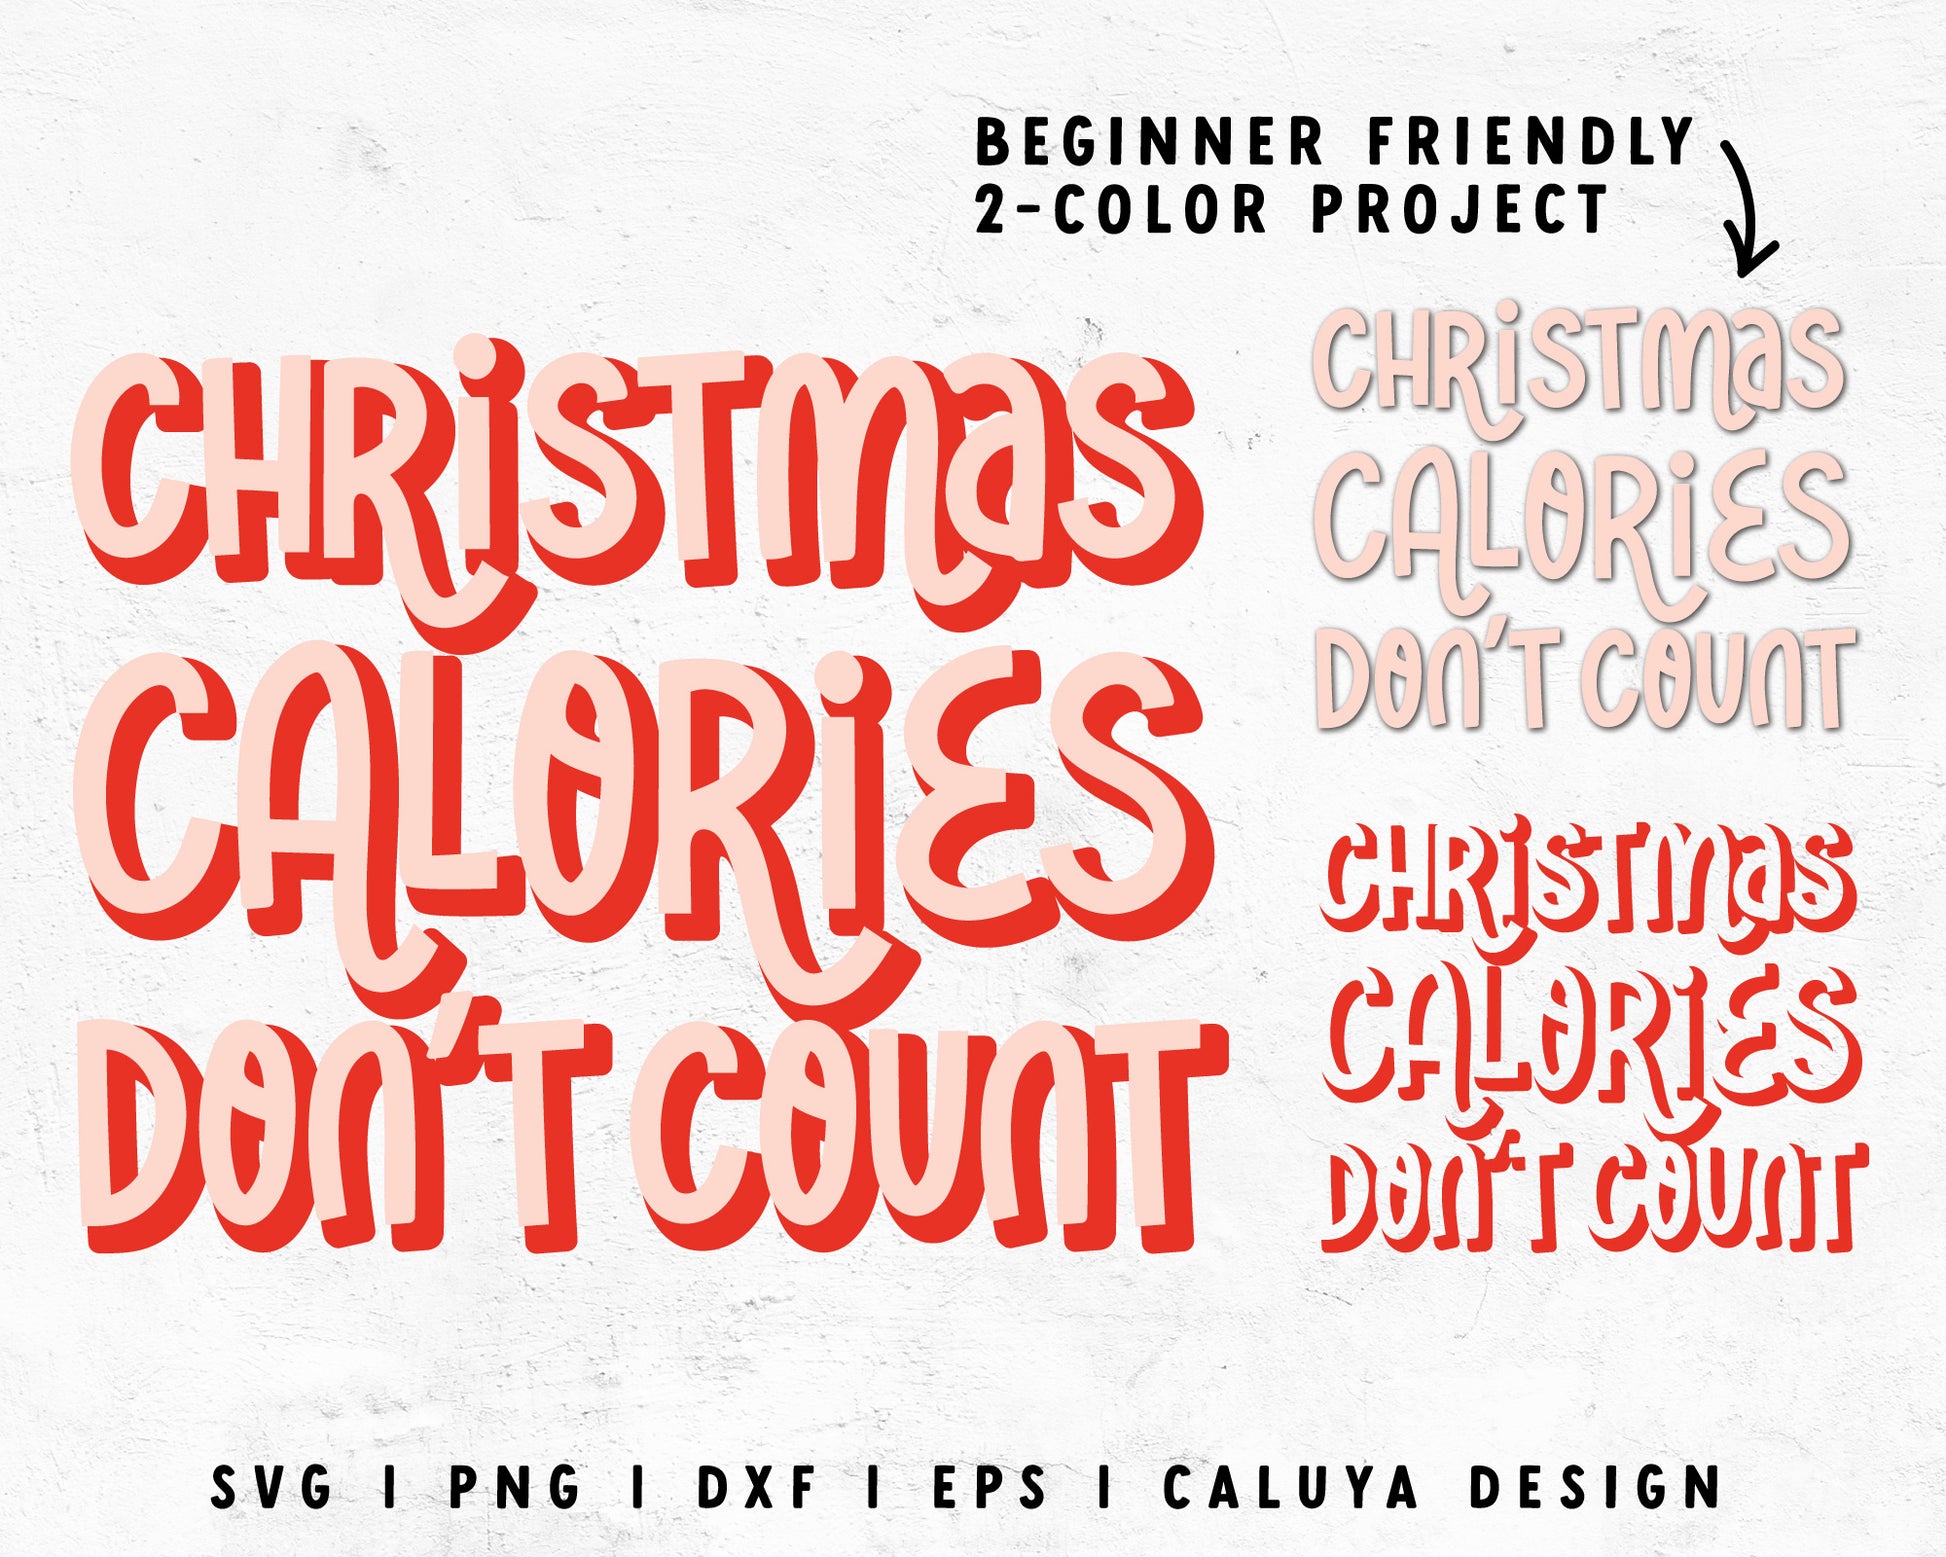 FREE Christmas Calories Don't Count SVG | Retro Christmas SVG Cut File for Cricut, Cameo Silhouette 